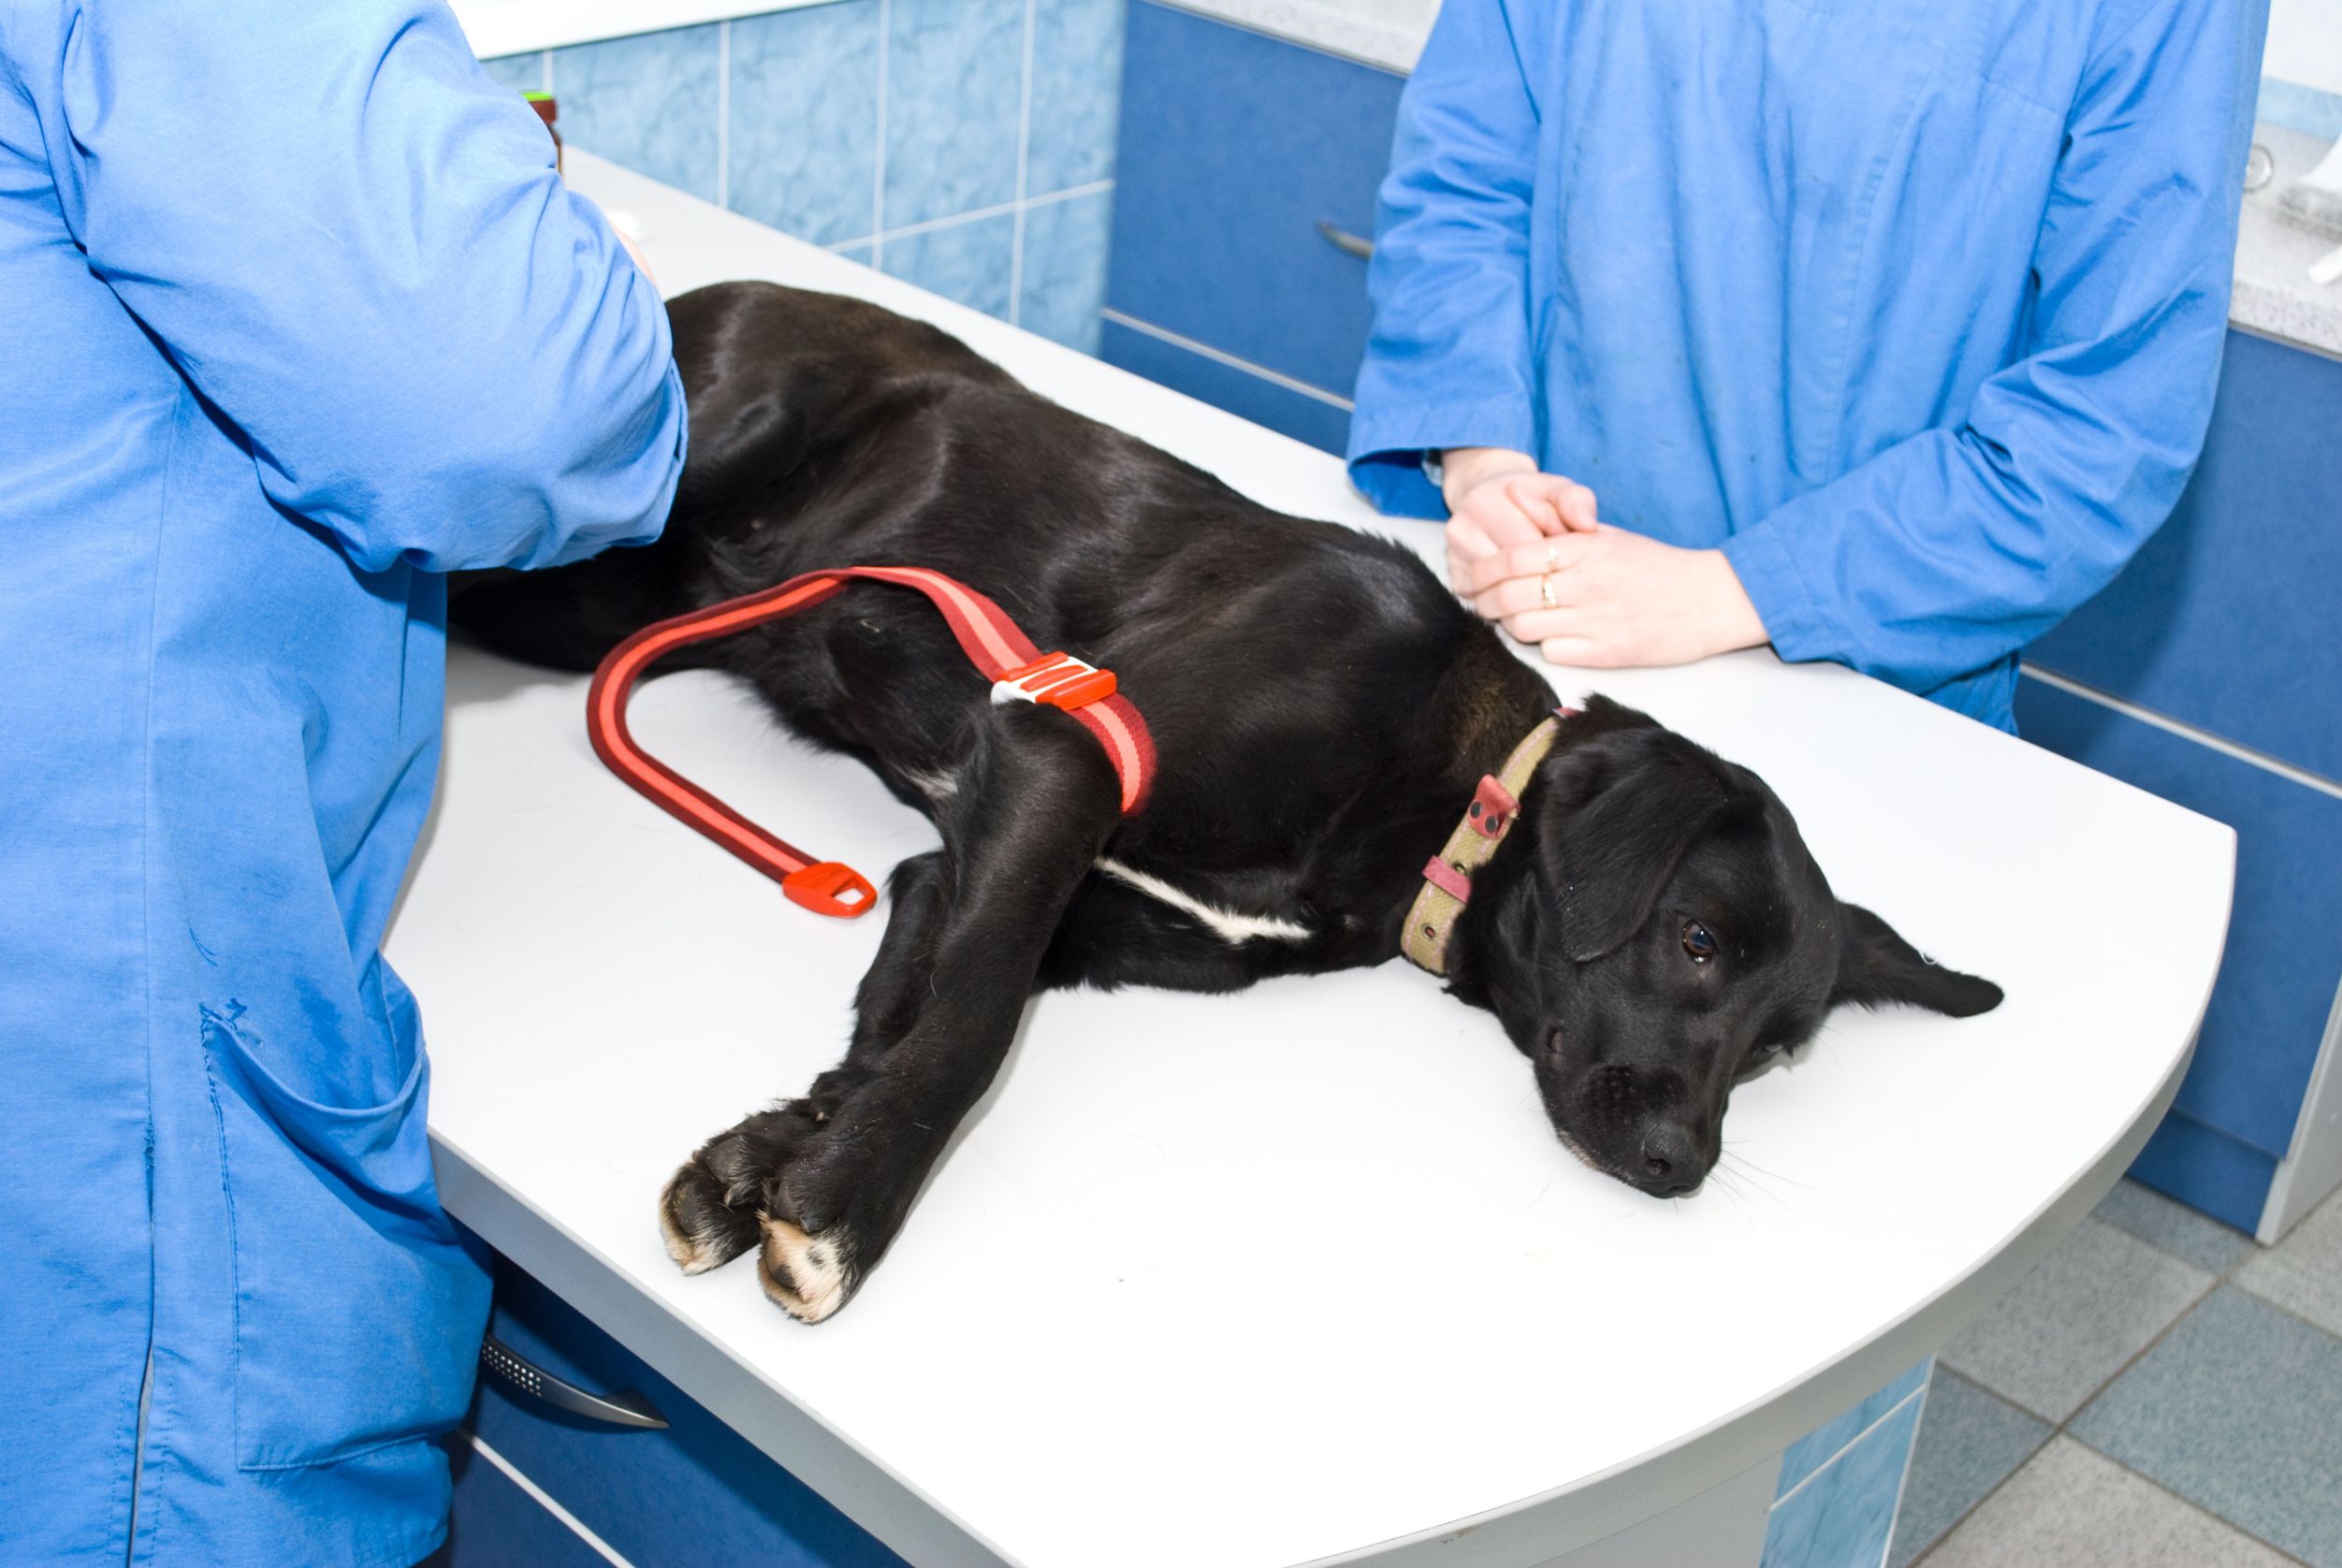 How to choose the best pet hospital in Riverside, CA